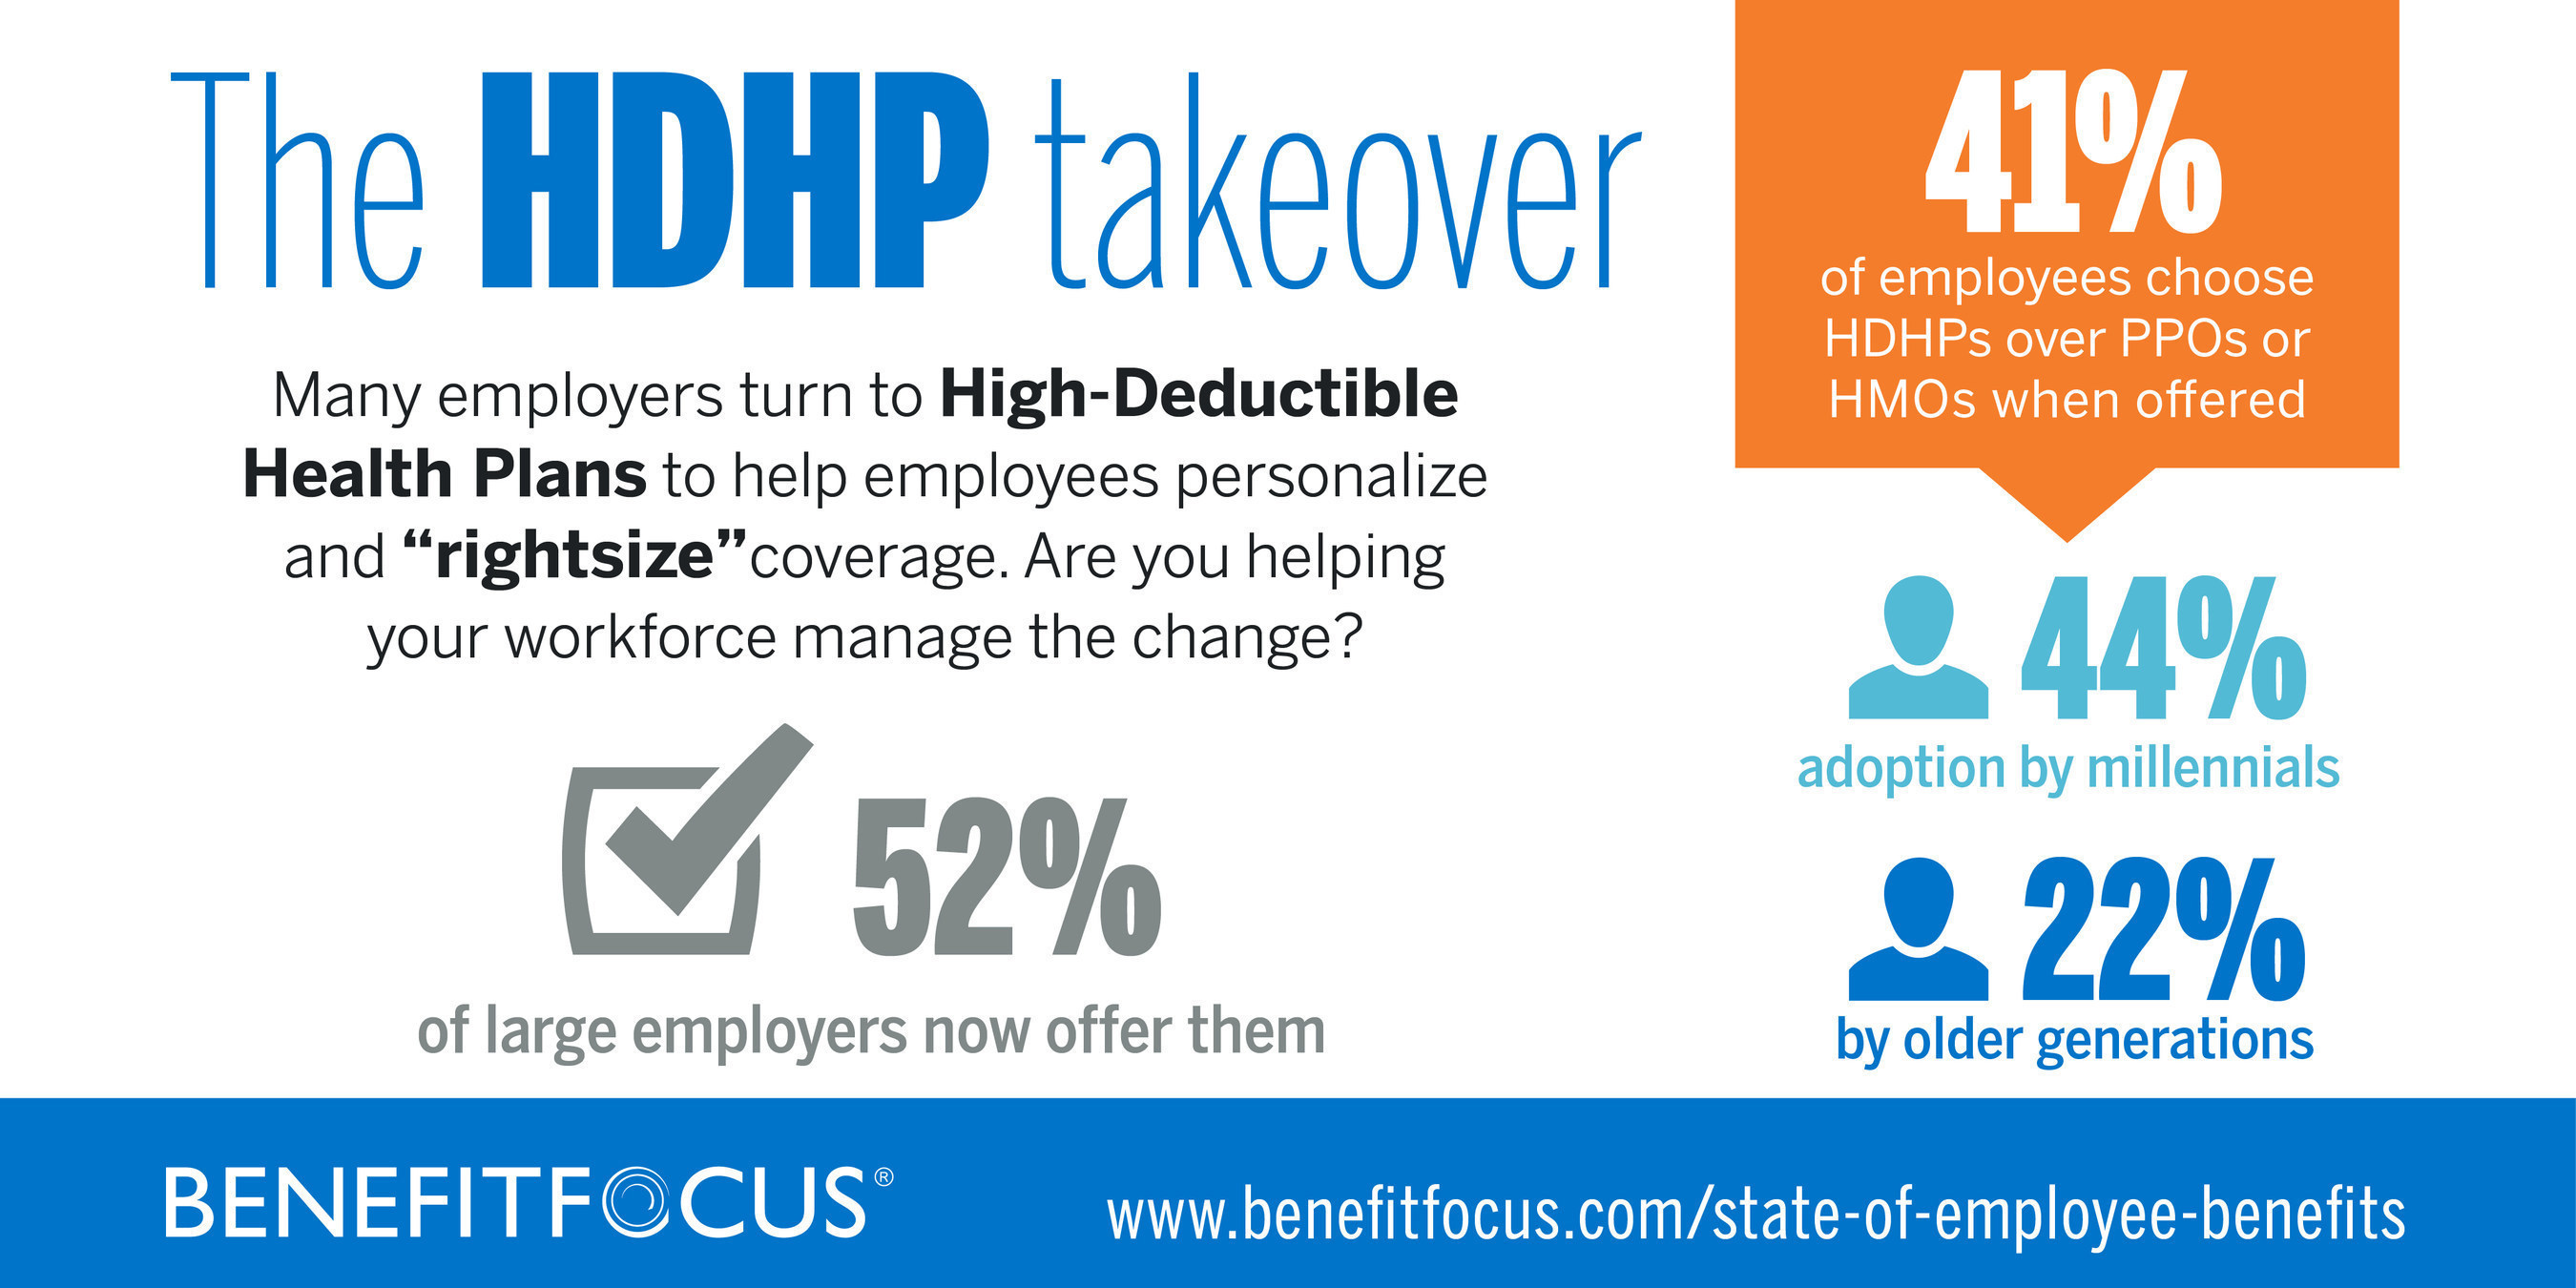 Data from the "Benefitfocus State of Employee Benefits 2016" report.